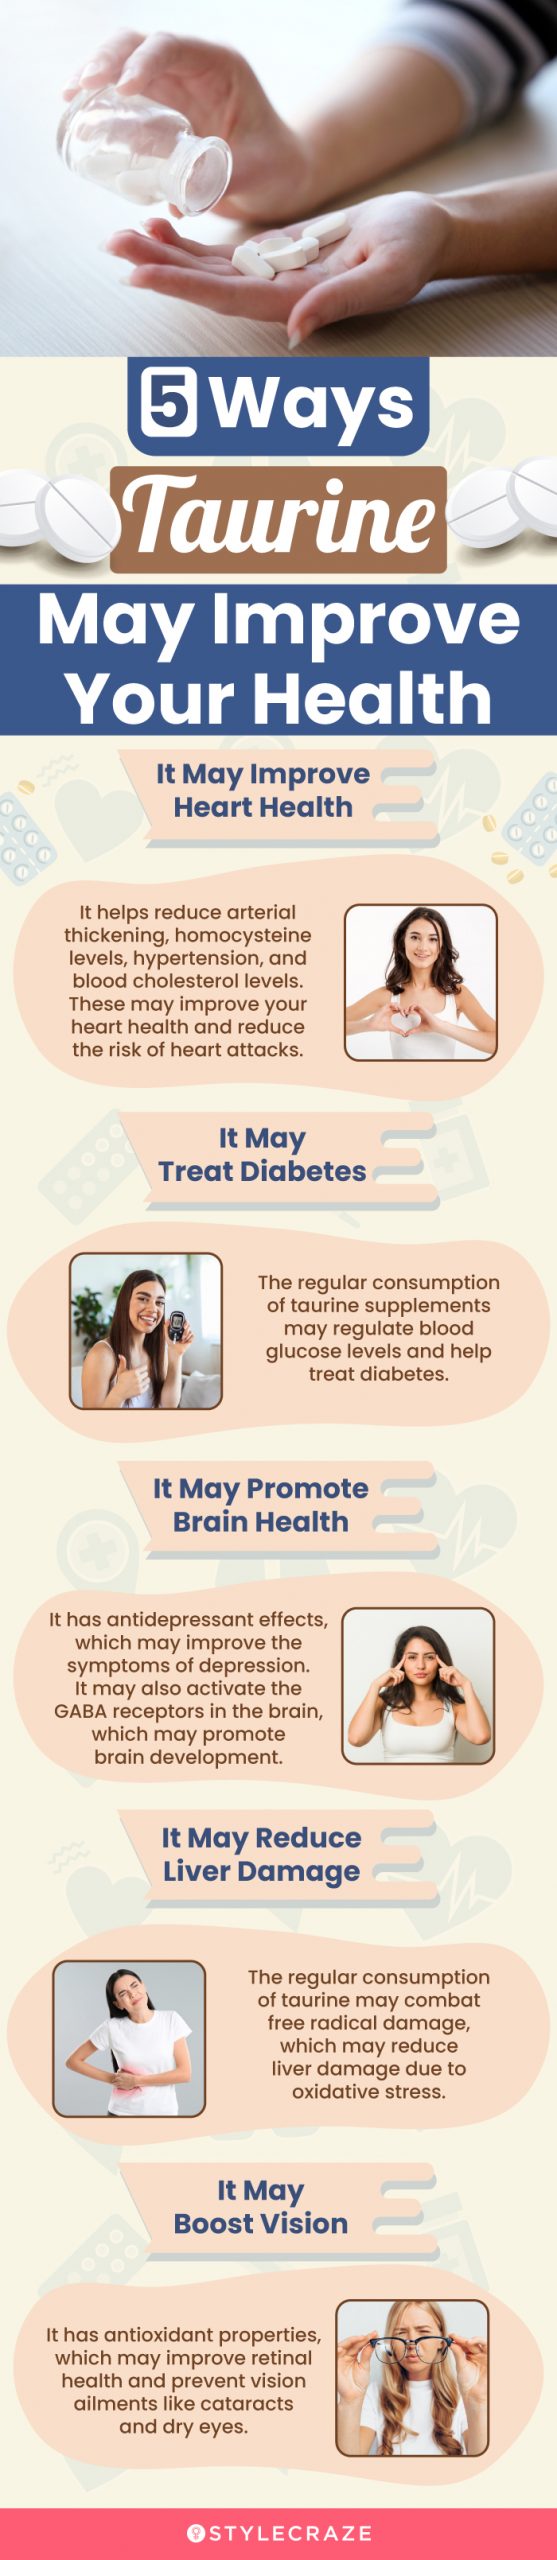 5 ways taurine may improve your health (infographic)